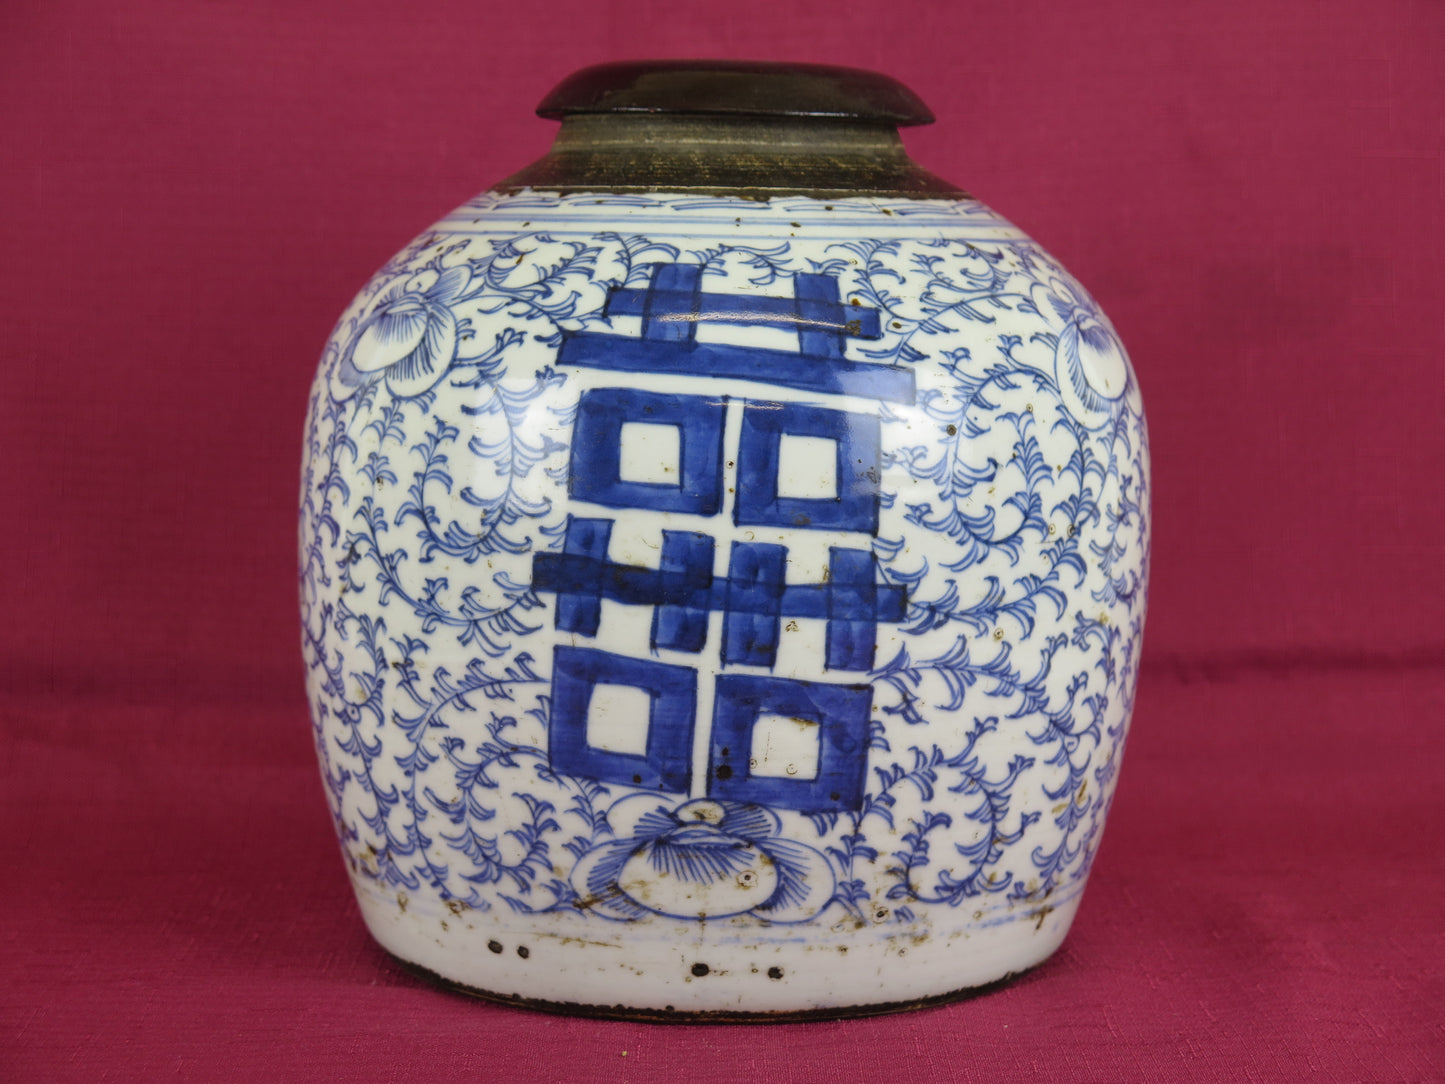 Antique blue white ceramic china vase collection of happiness Chinese wedding China CM2